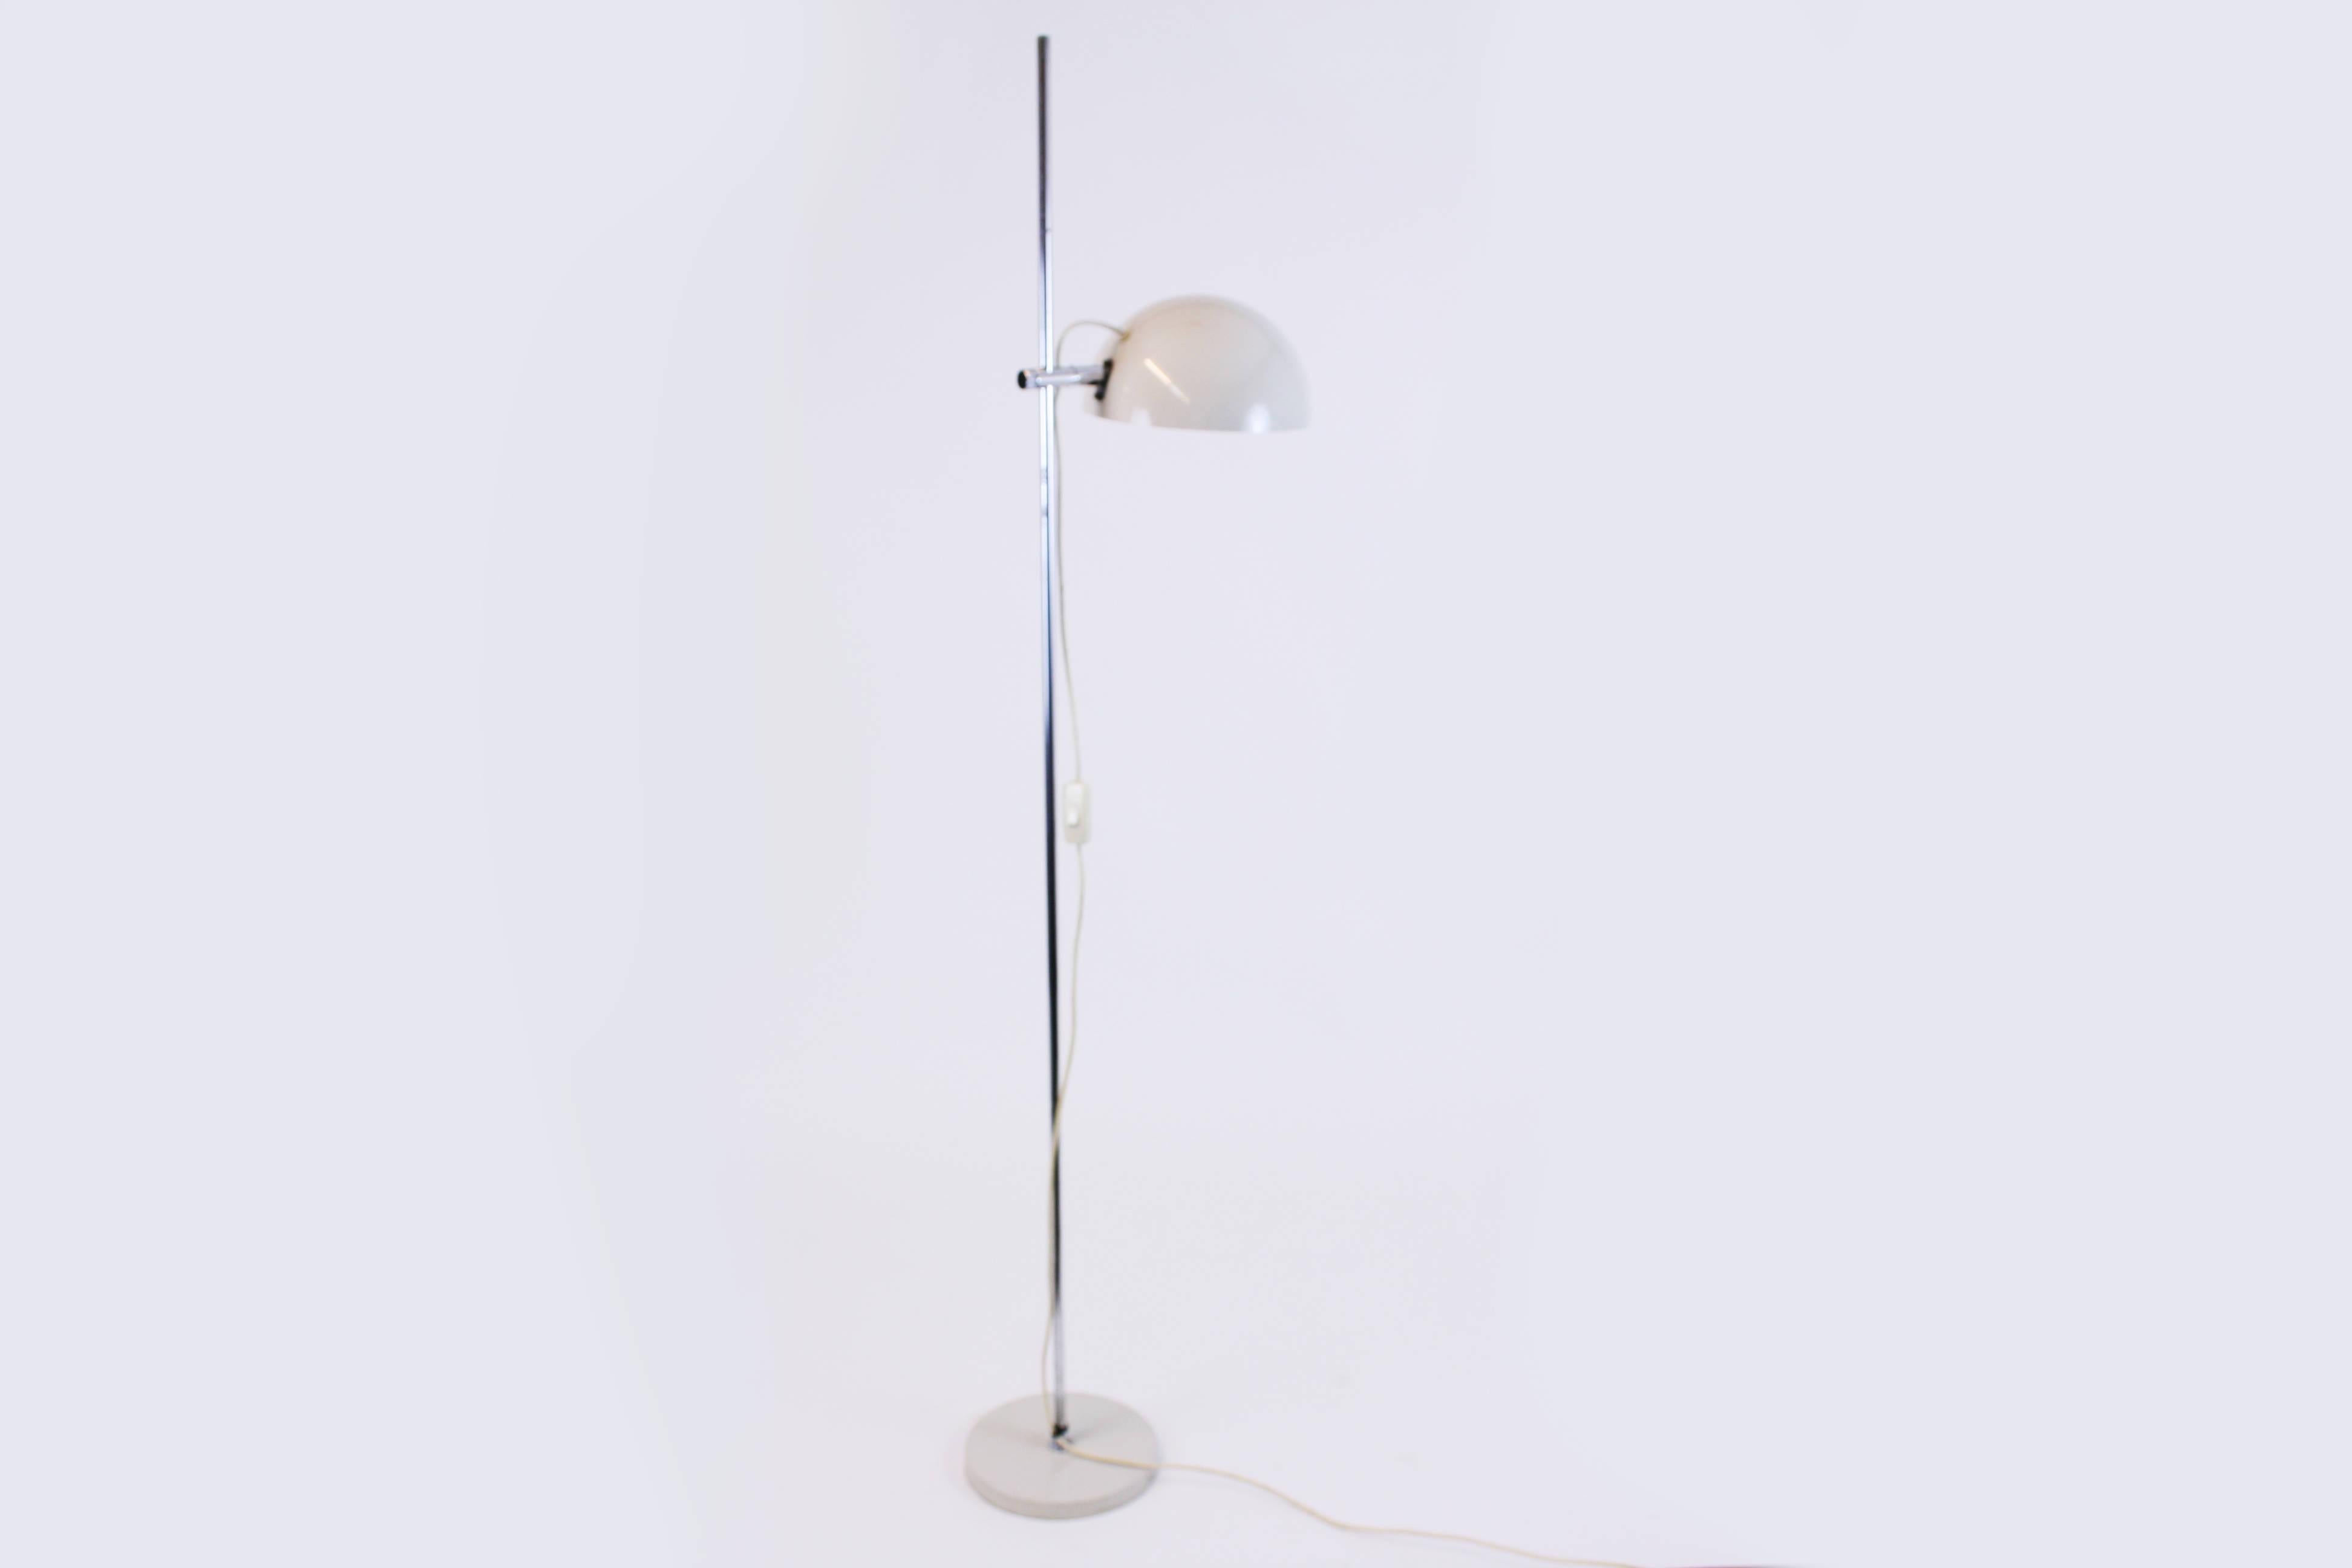 Floor lamp Koch & Lowy for Omi made in USA shows a strong remininscence to Bauhaus design using circle, triangle or rectangle as basis elements. The object completely consists of metal. Its strictly reduced design is muted by the warm colour tone.